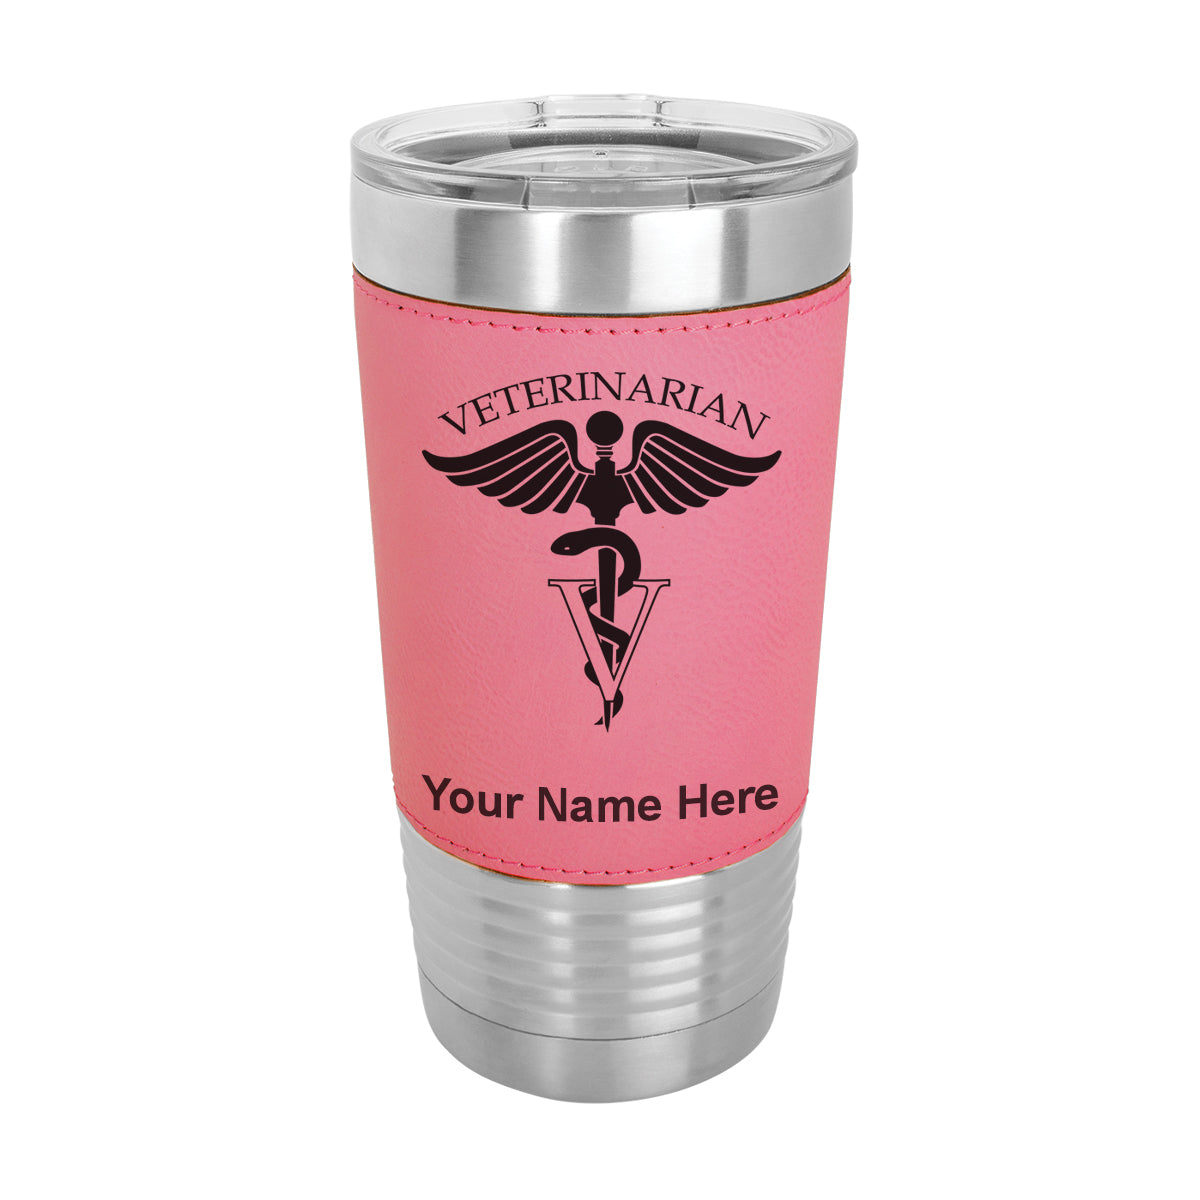 20oz Faux Leather Tumbler Mug, Veterinarian, Personalized Engraving Included